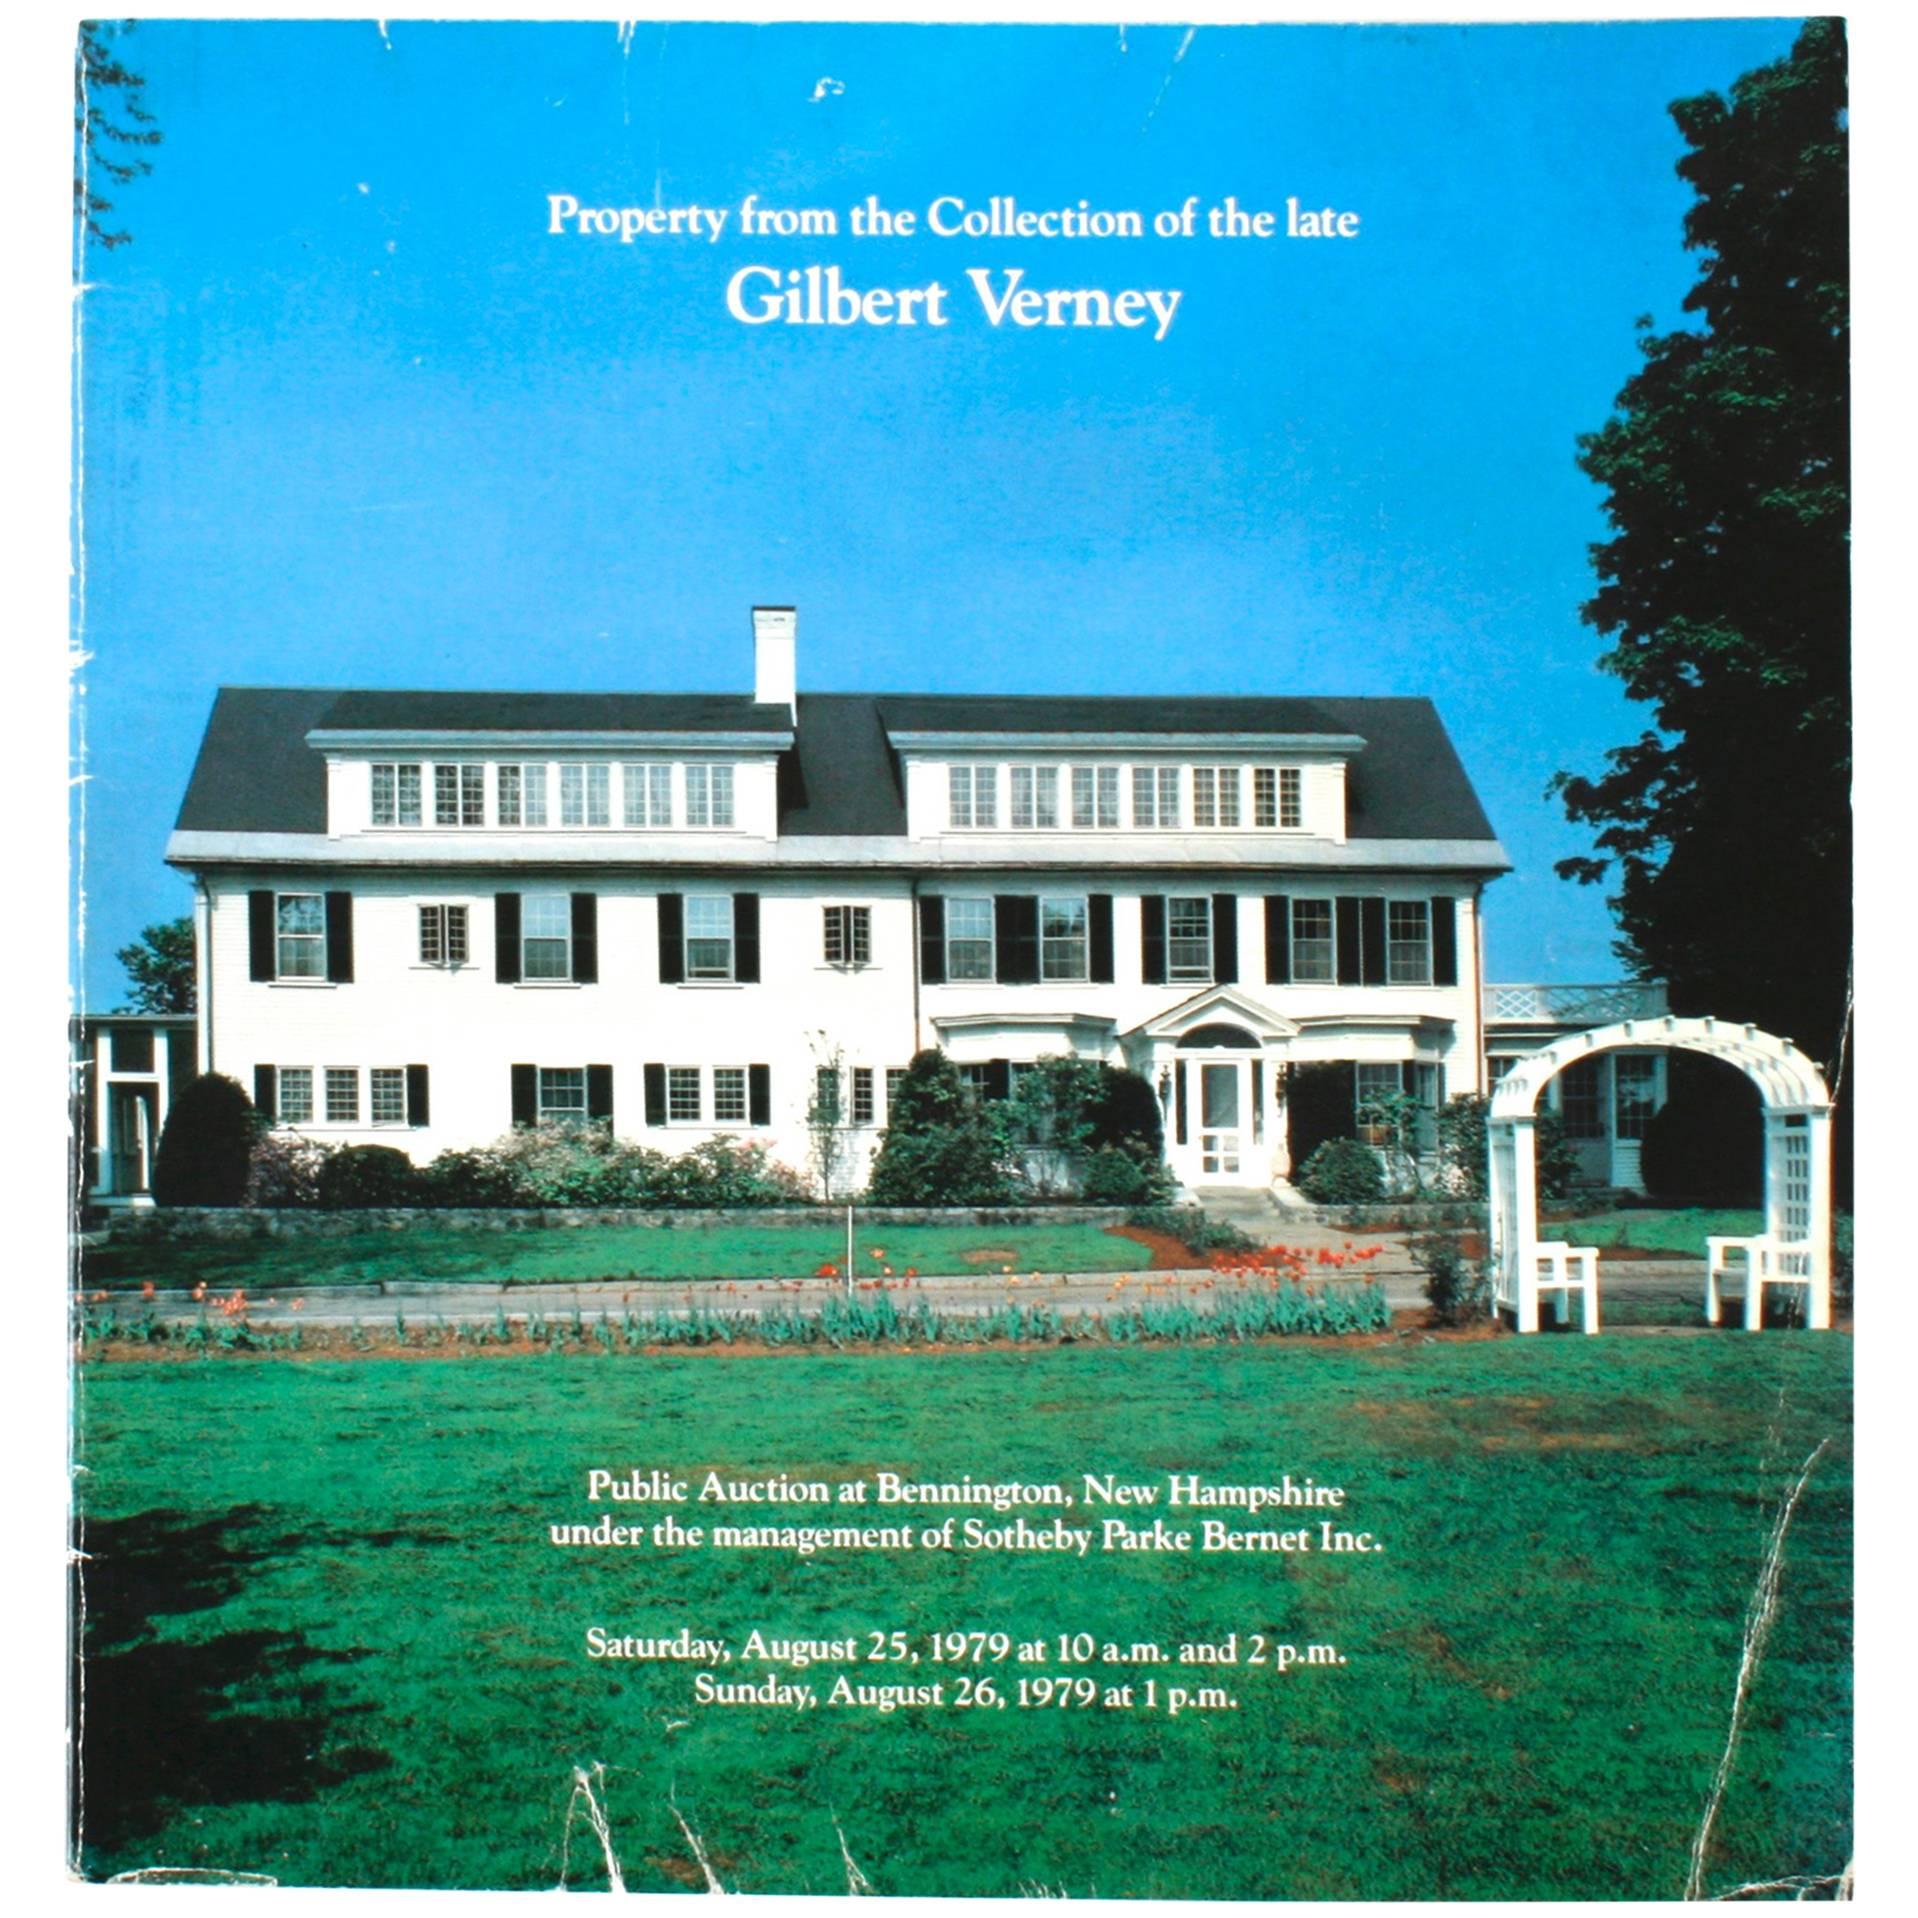 Sotheby's: Property from the Collection of the Late Gilbert Verney, 1979